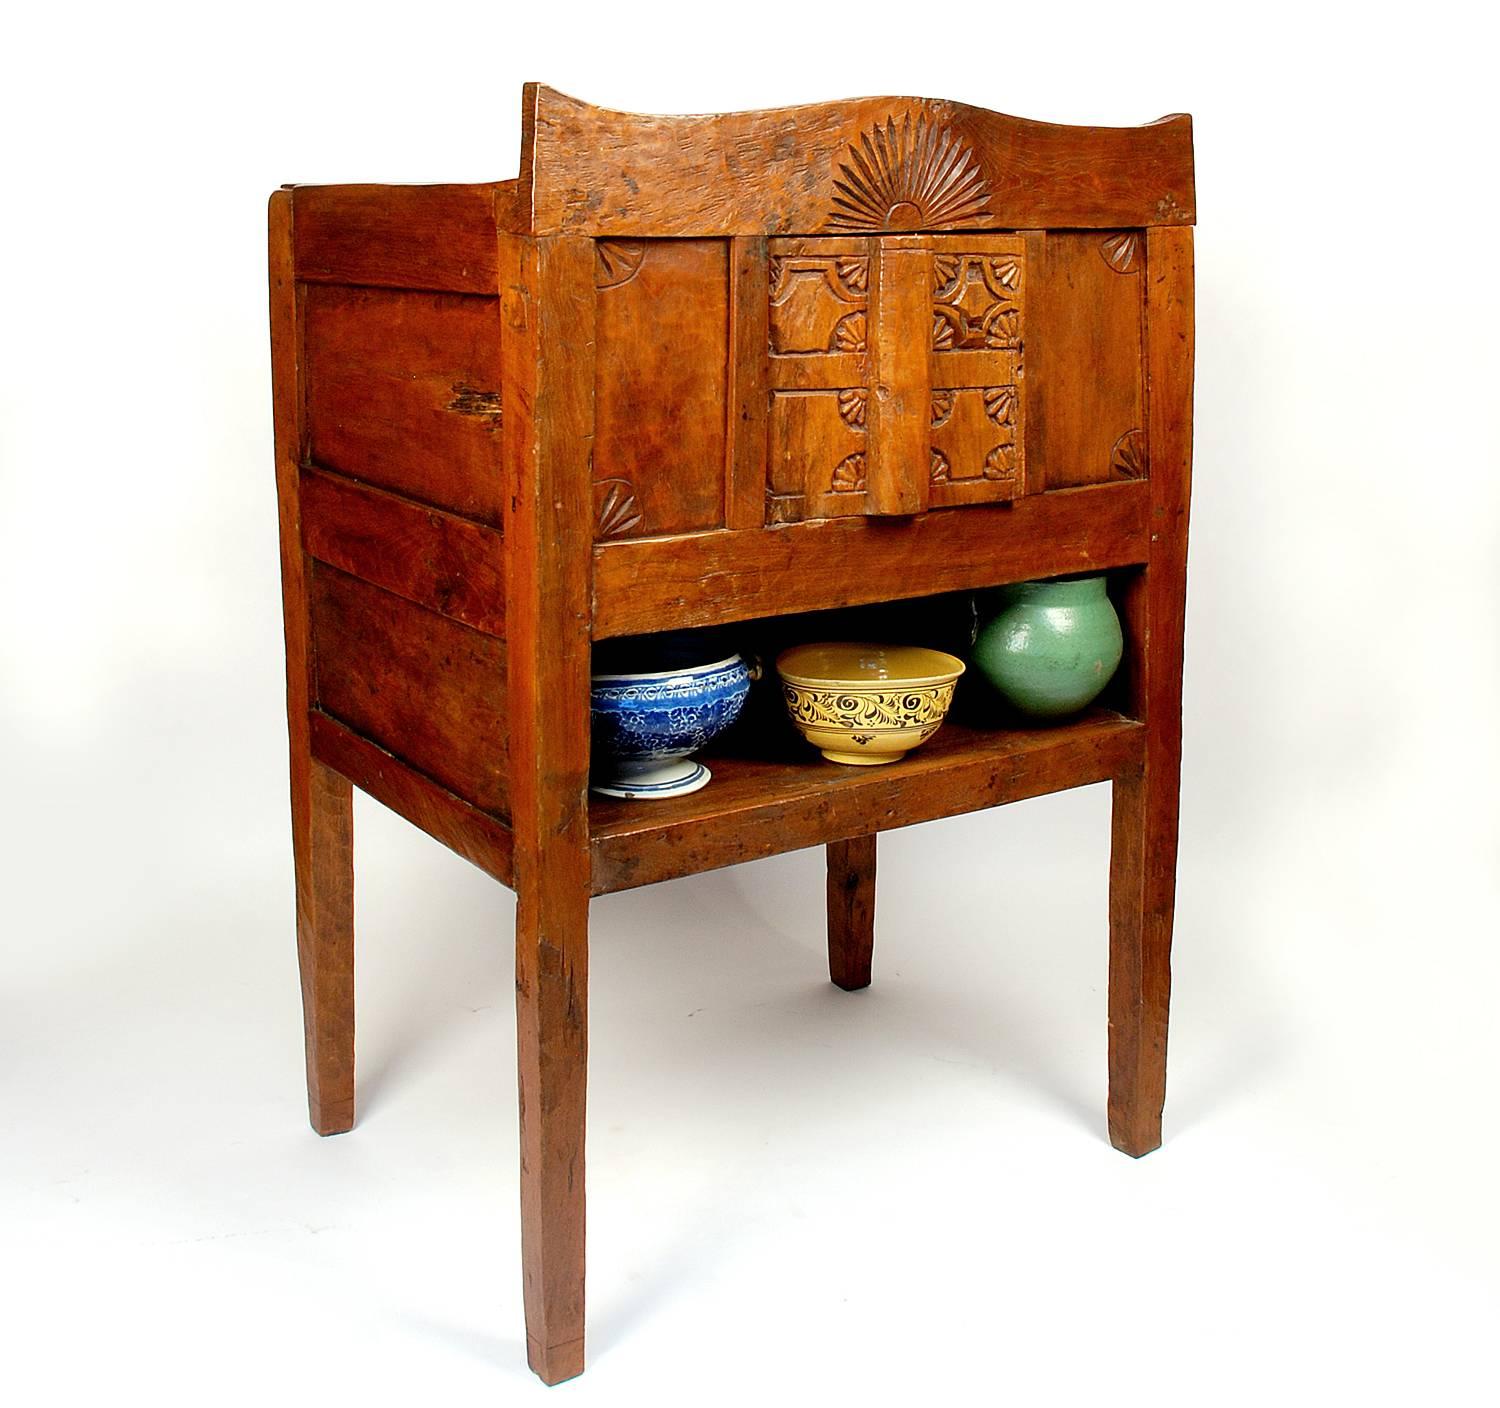 Extremely rare 1930's / 40's WPA period 'trastero' (kitchen cabinet) from New Mexico. This hand carved and hand adzed cedar wood 'trastero' was made by traditional WPA craftsman who used traditional tools and techniques to build quality furniture